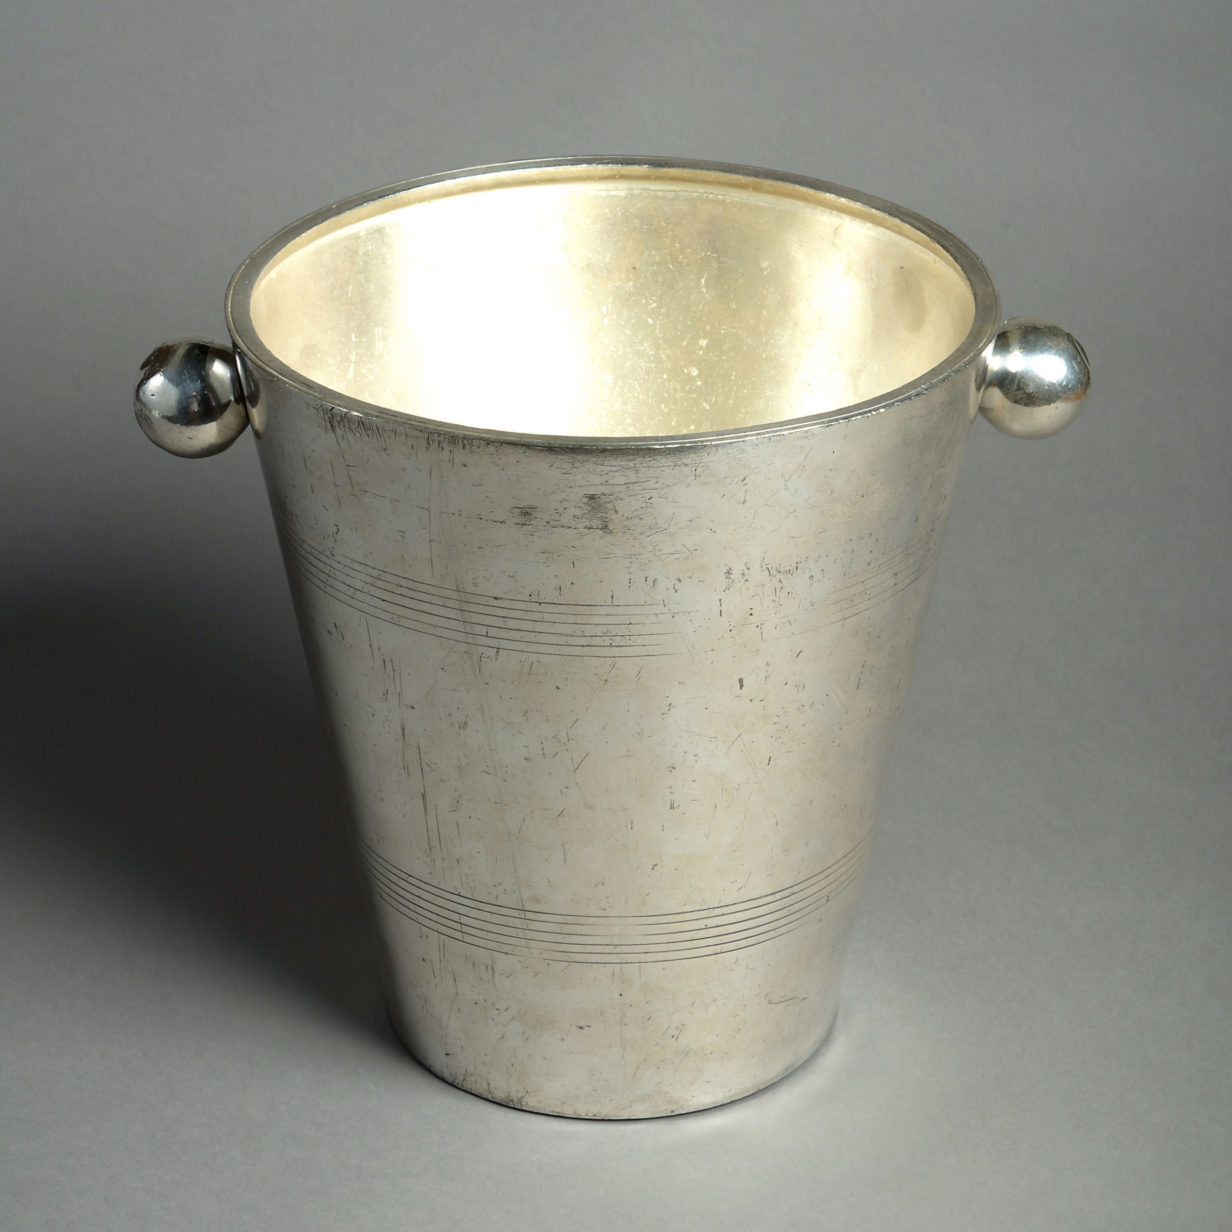 Early 20th century art deco magnum champagne cooler